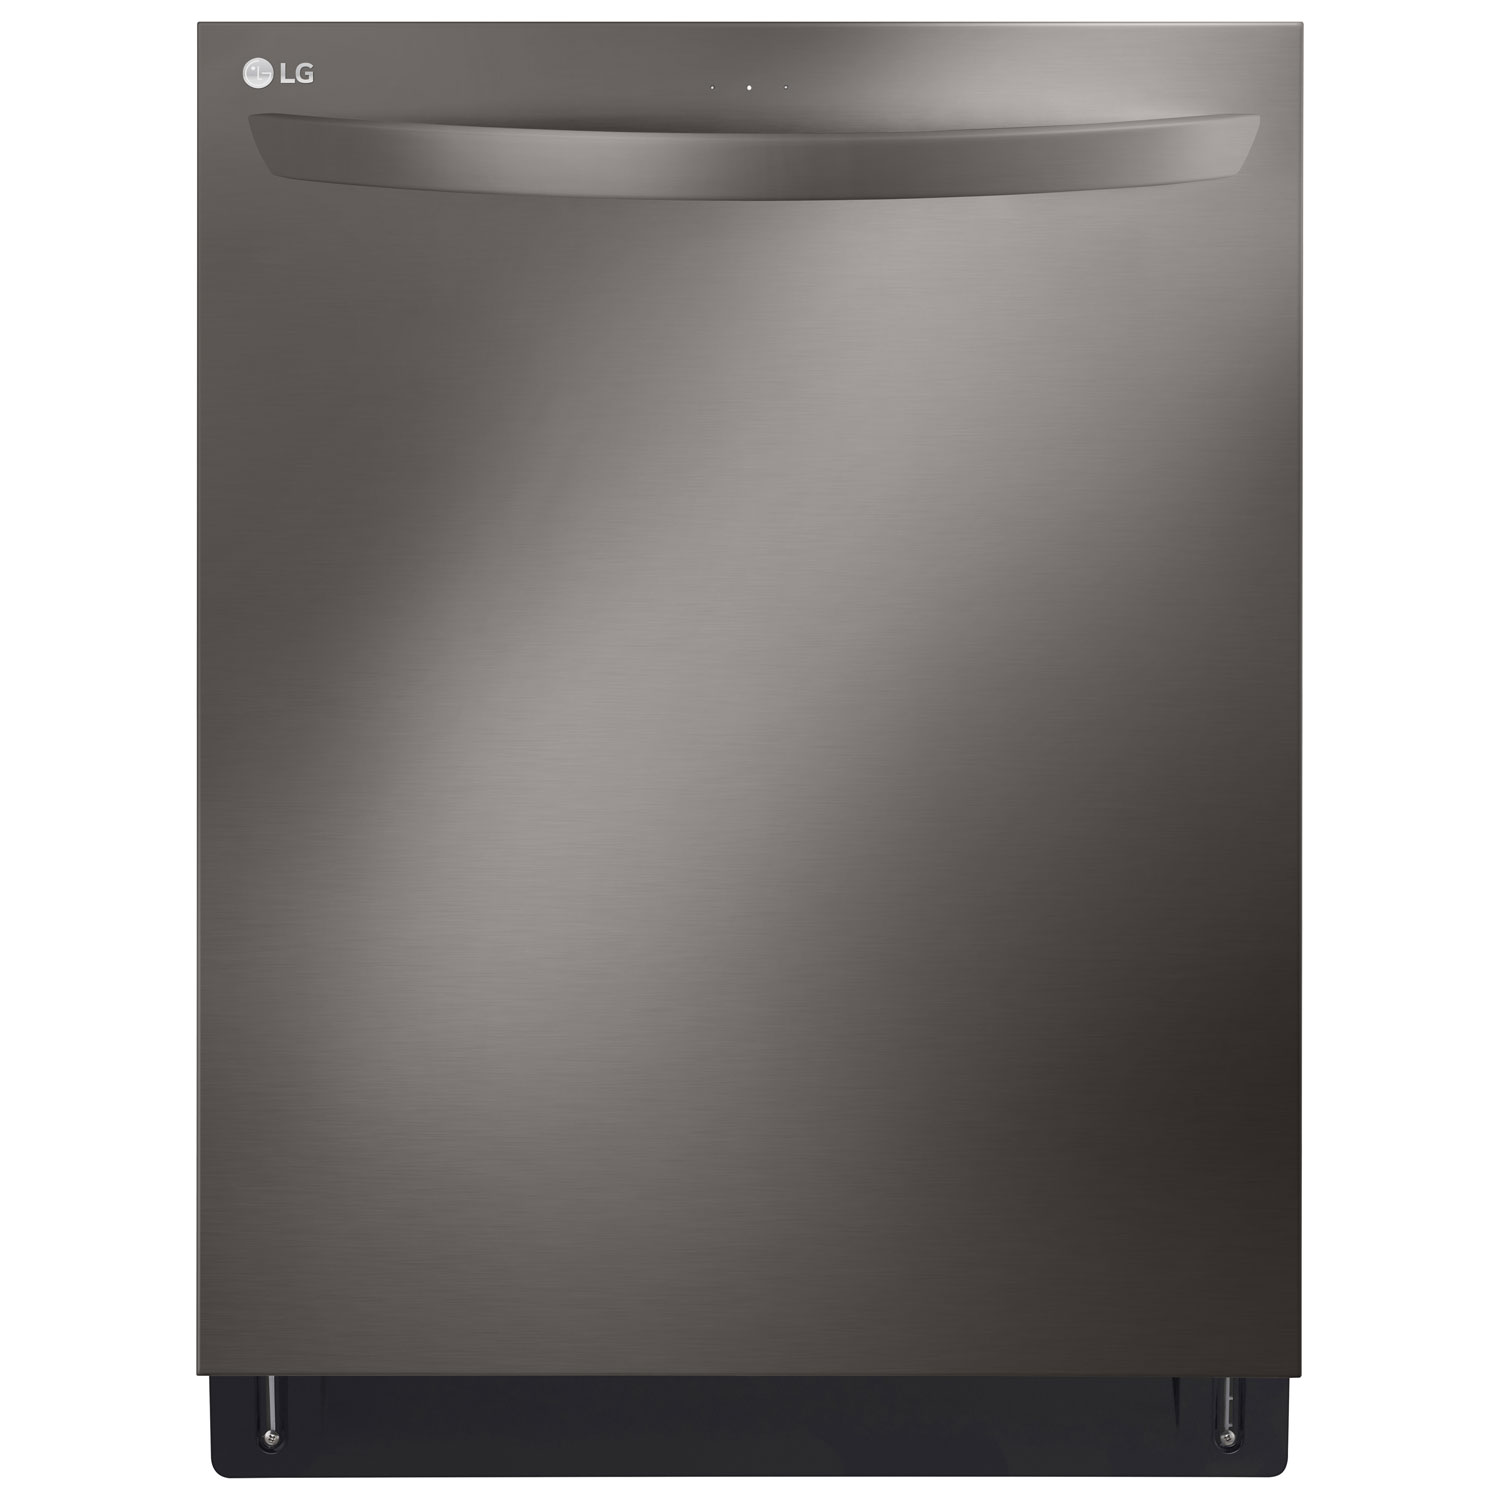 LG 24" 42dB Built-In Dishwasher with Stainless Steel Tub & Third Rack (LDTH7972D) - Black Stainless